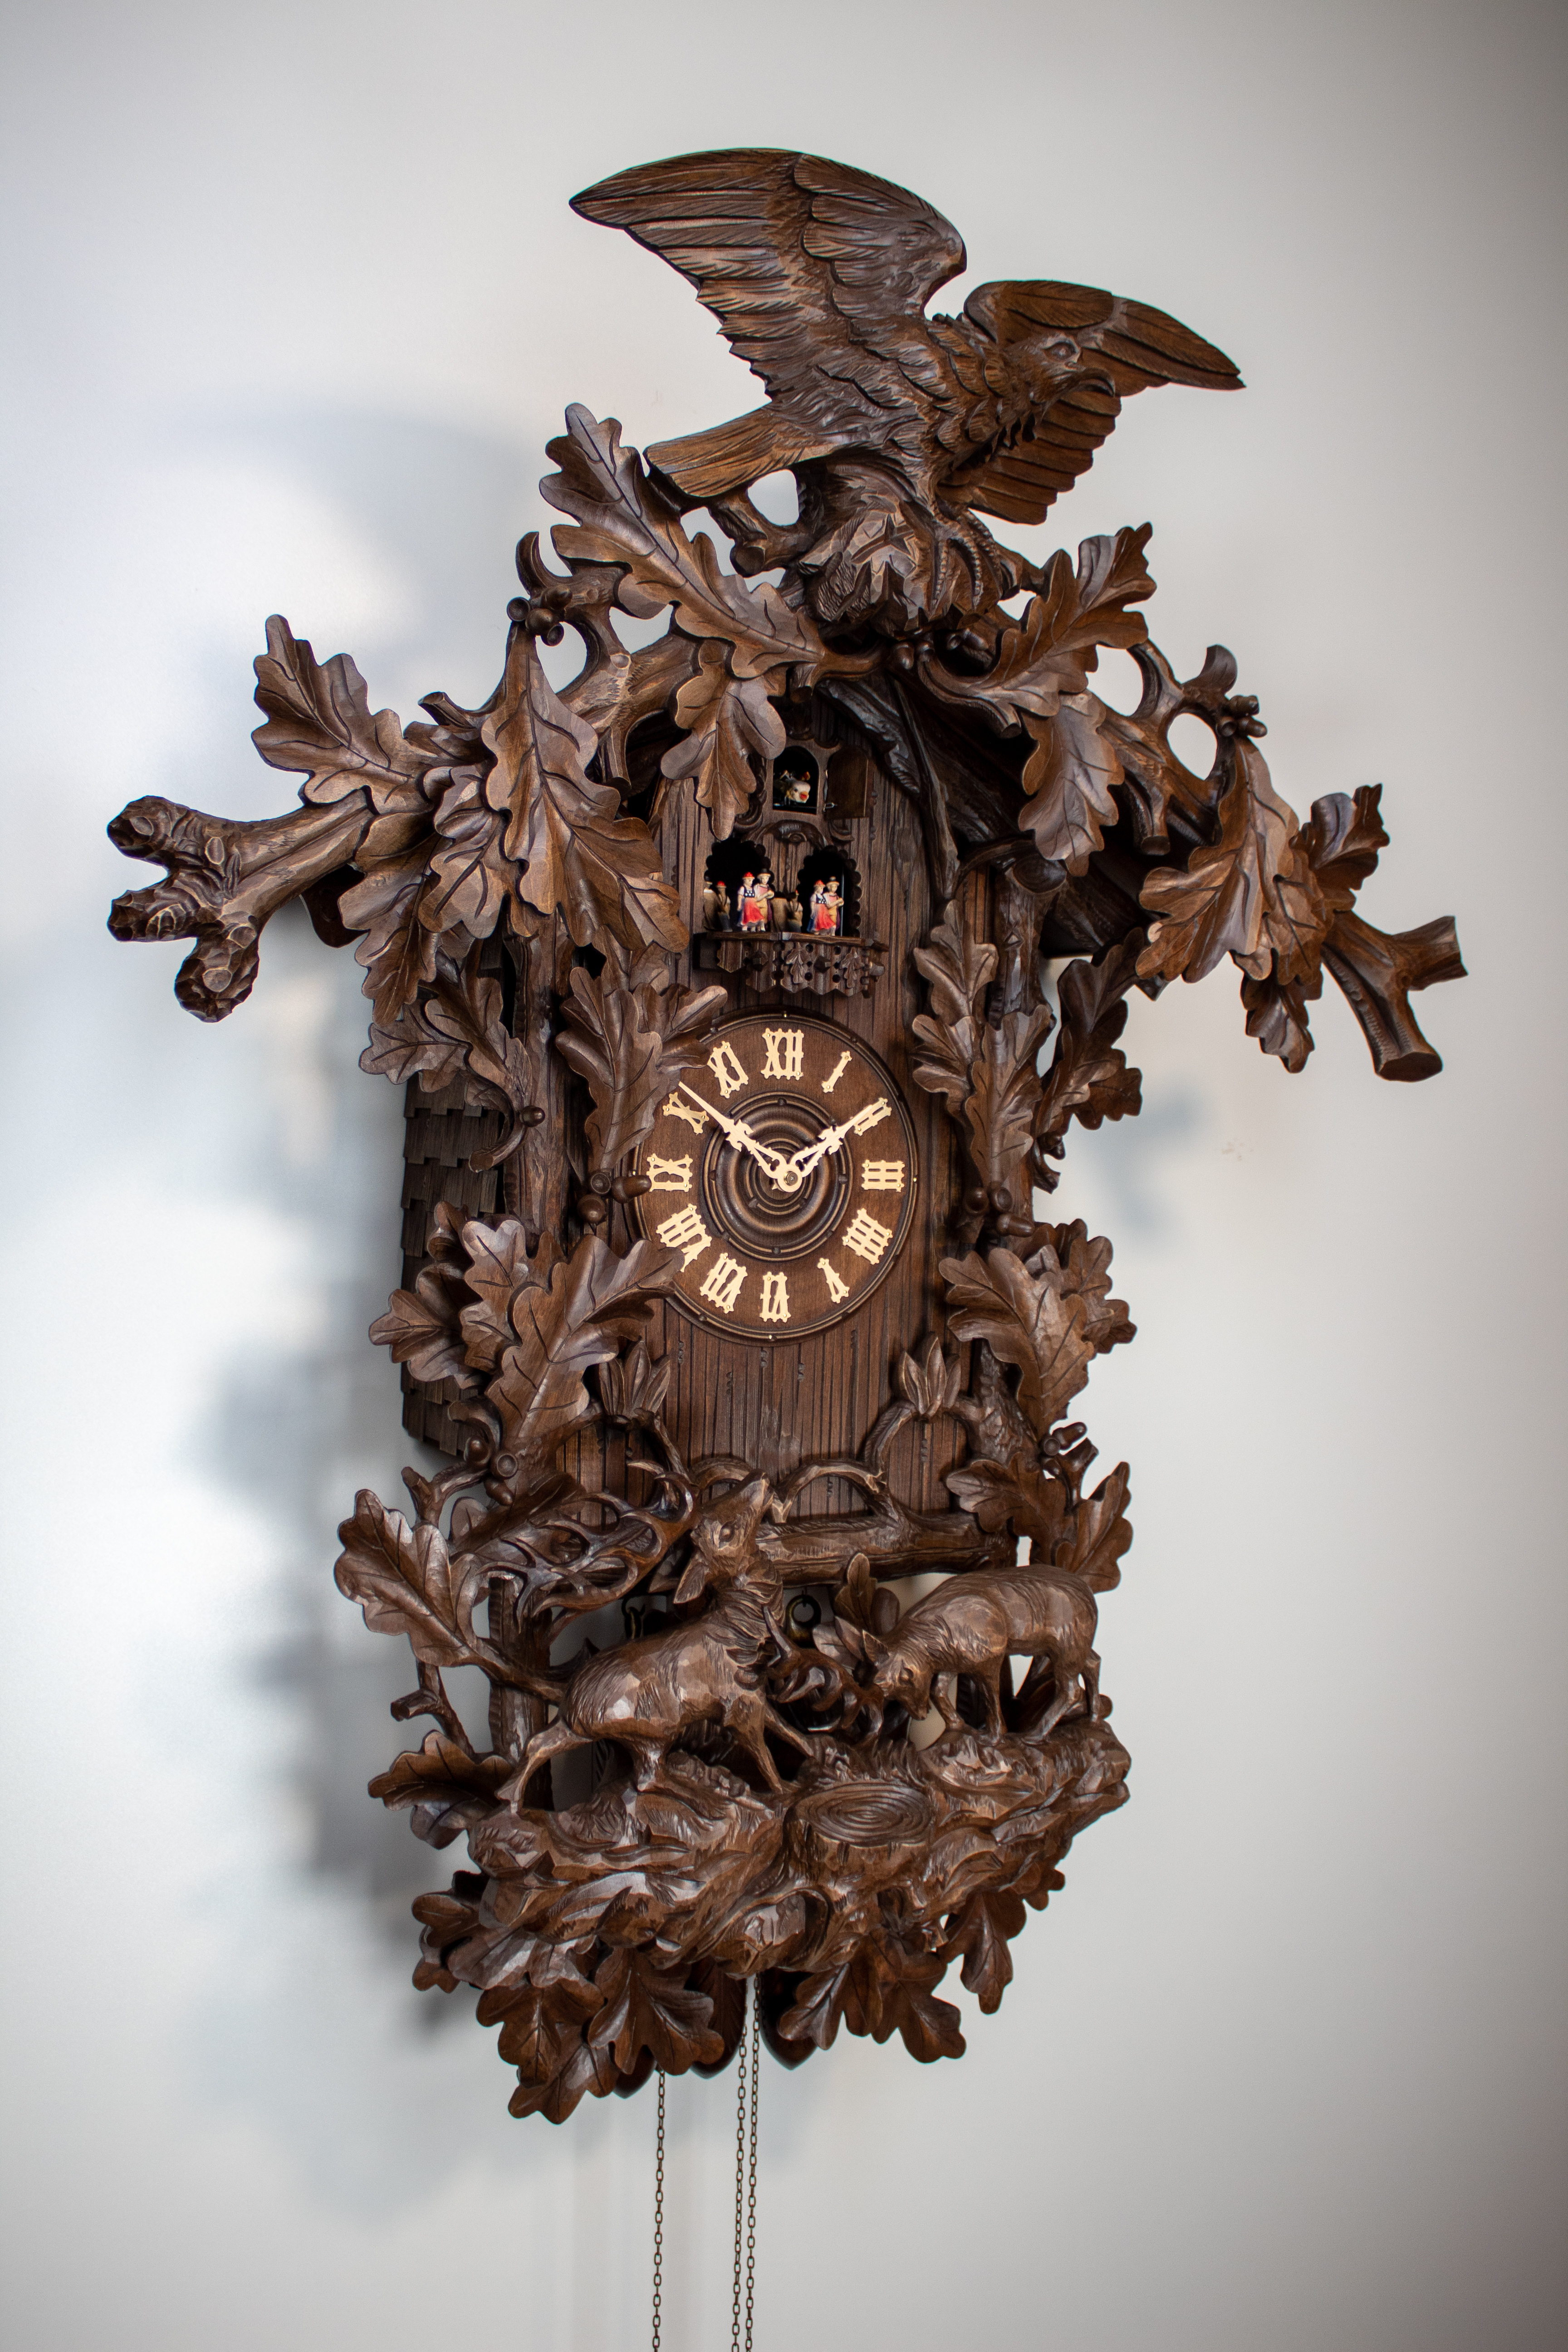 Historical 8 Days Music Dancer Cuckoo Clock with eagle and fighting deer 